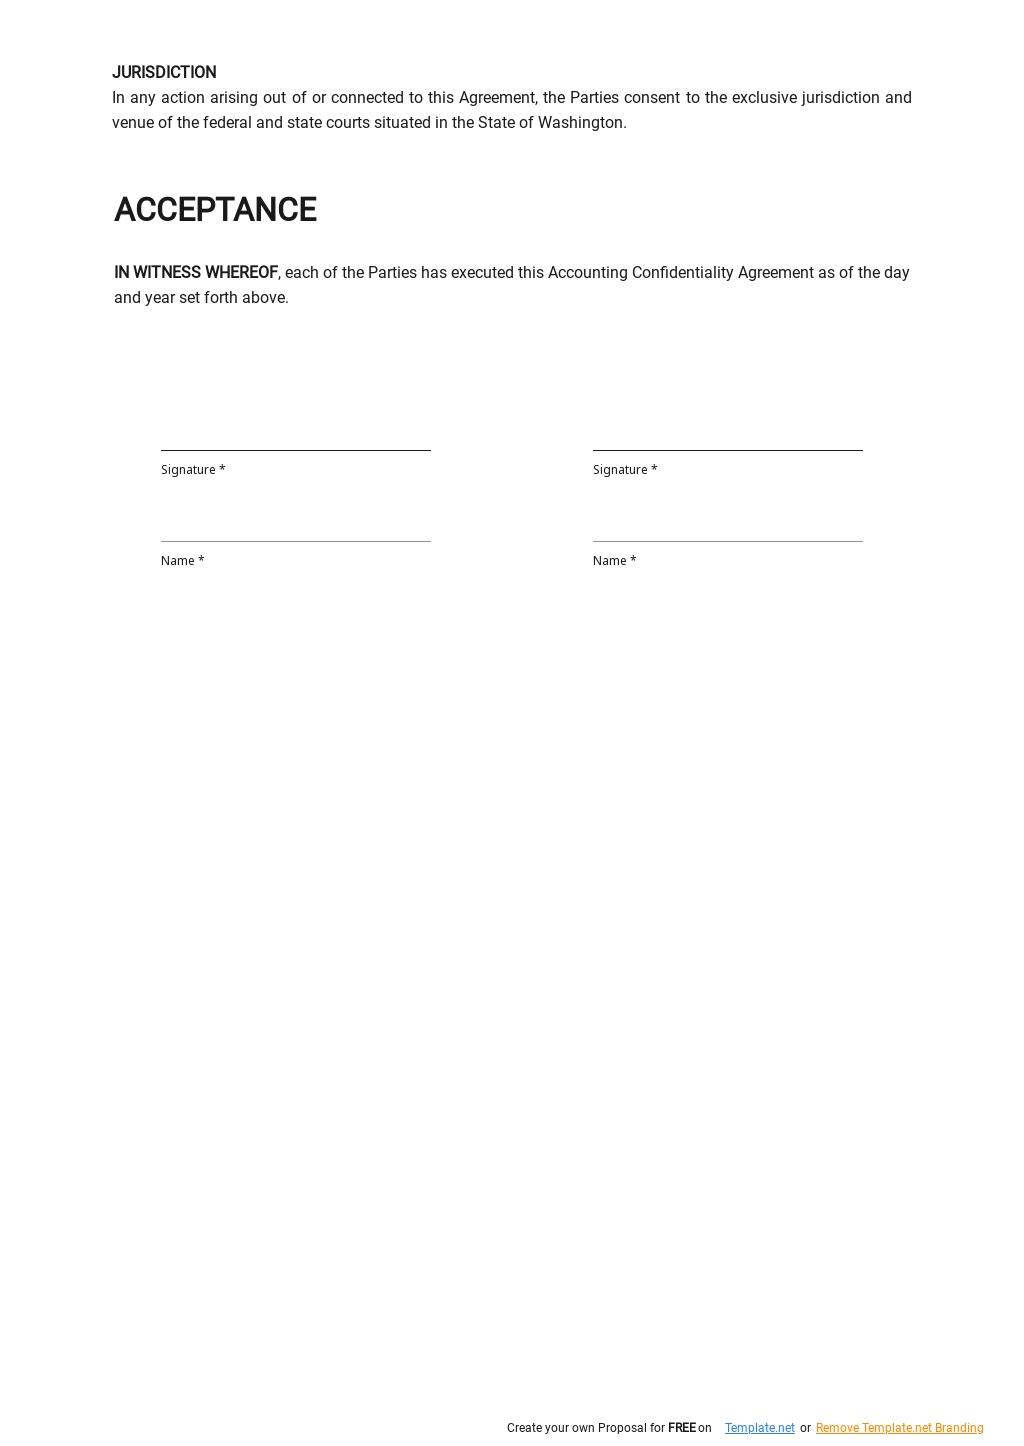 Accounting Confidentiality Agreement Template 2.jpe